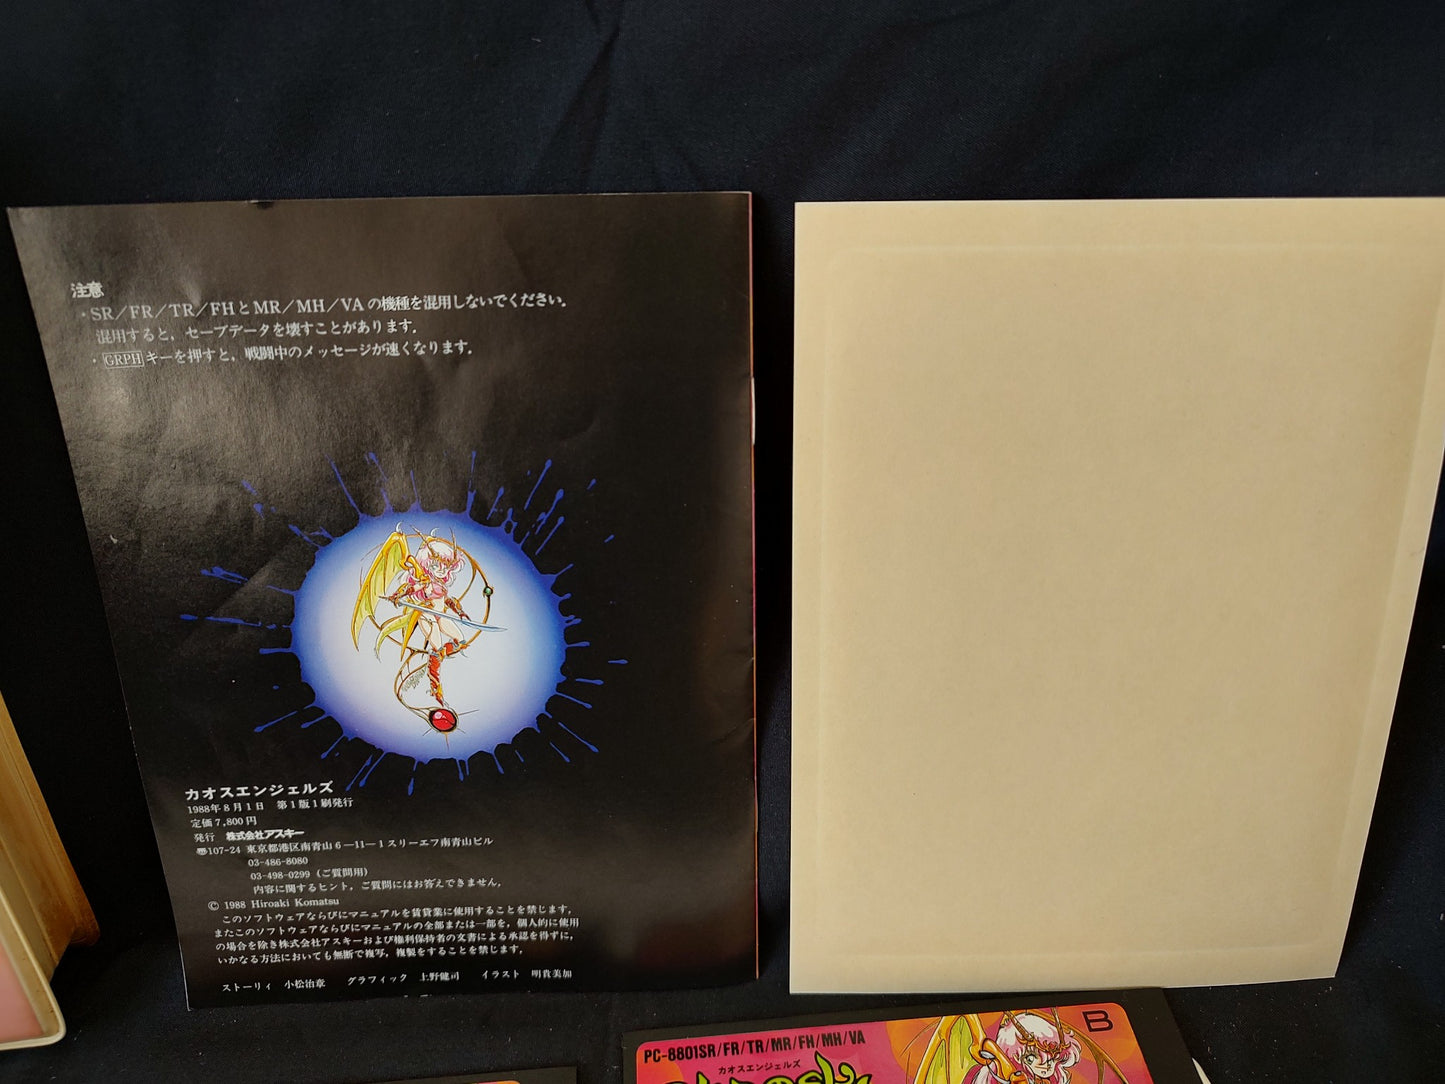 PC-8801 CHAOS ANGELS PC88 Game w/Manual, Papers, Box set, Not tested-g0208-